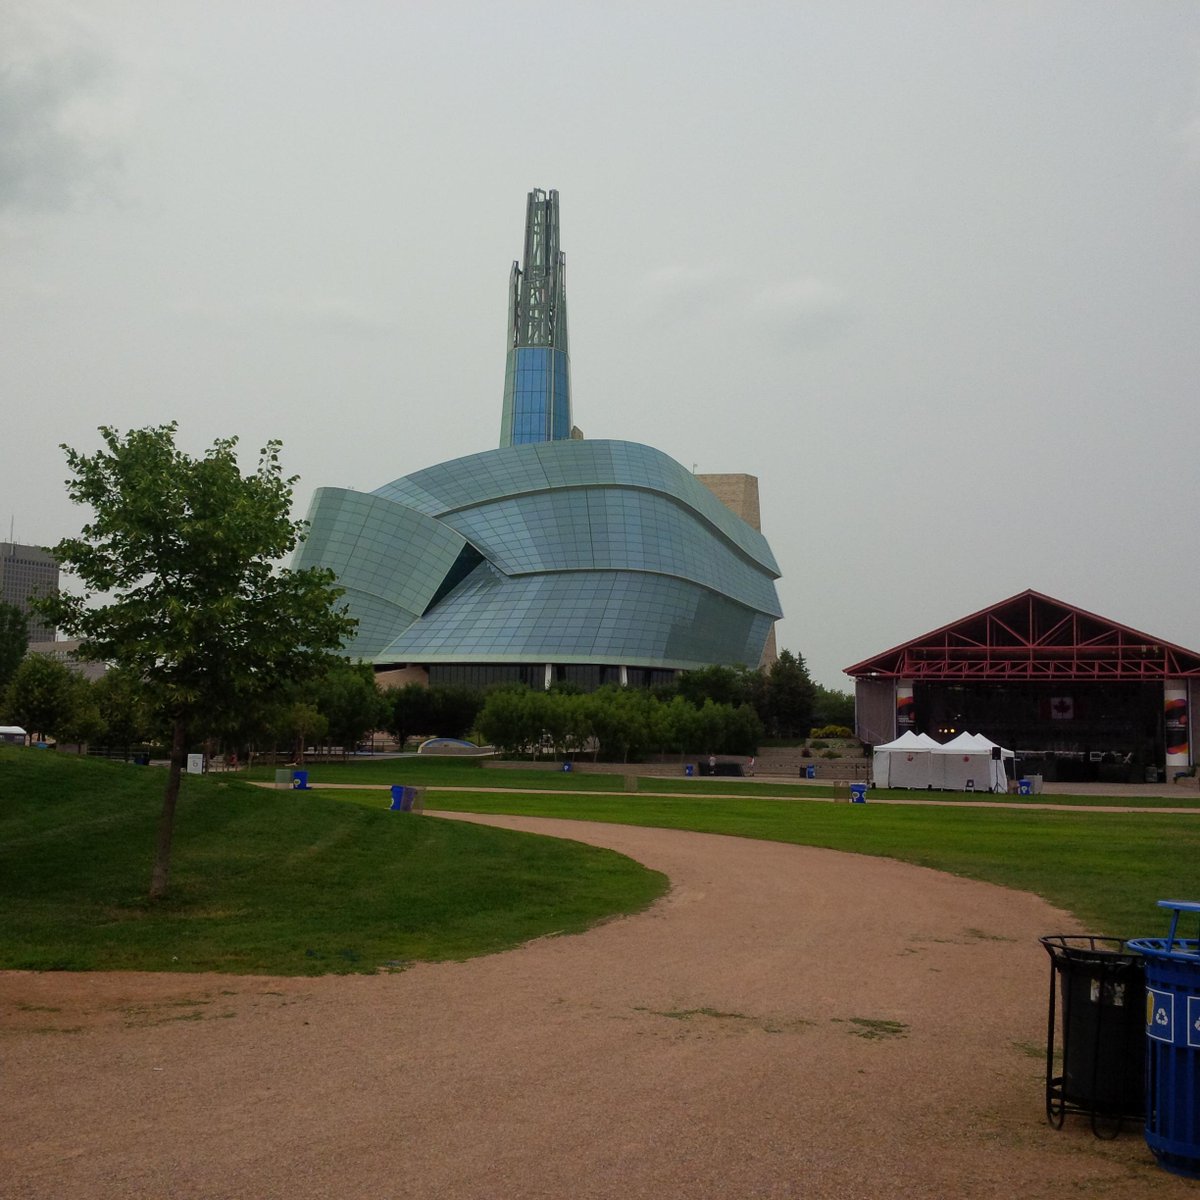 @TheForks #CanadianHumanRightsMuseum #CanadaDay our view from the Slushie King at the forks today